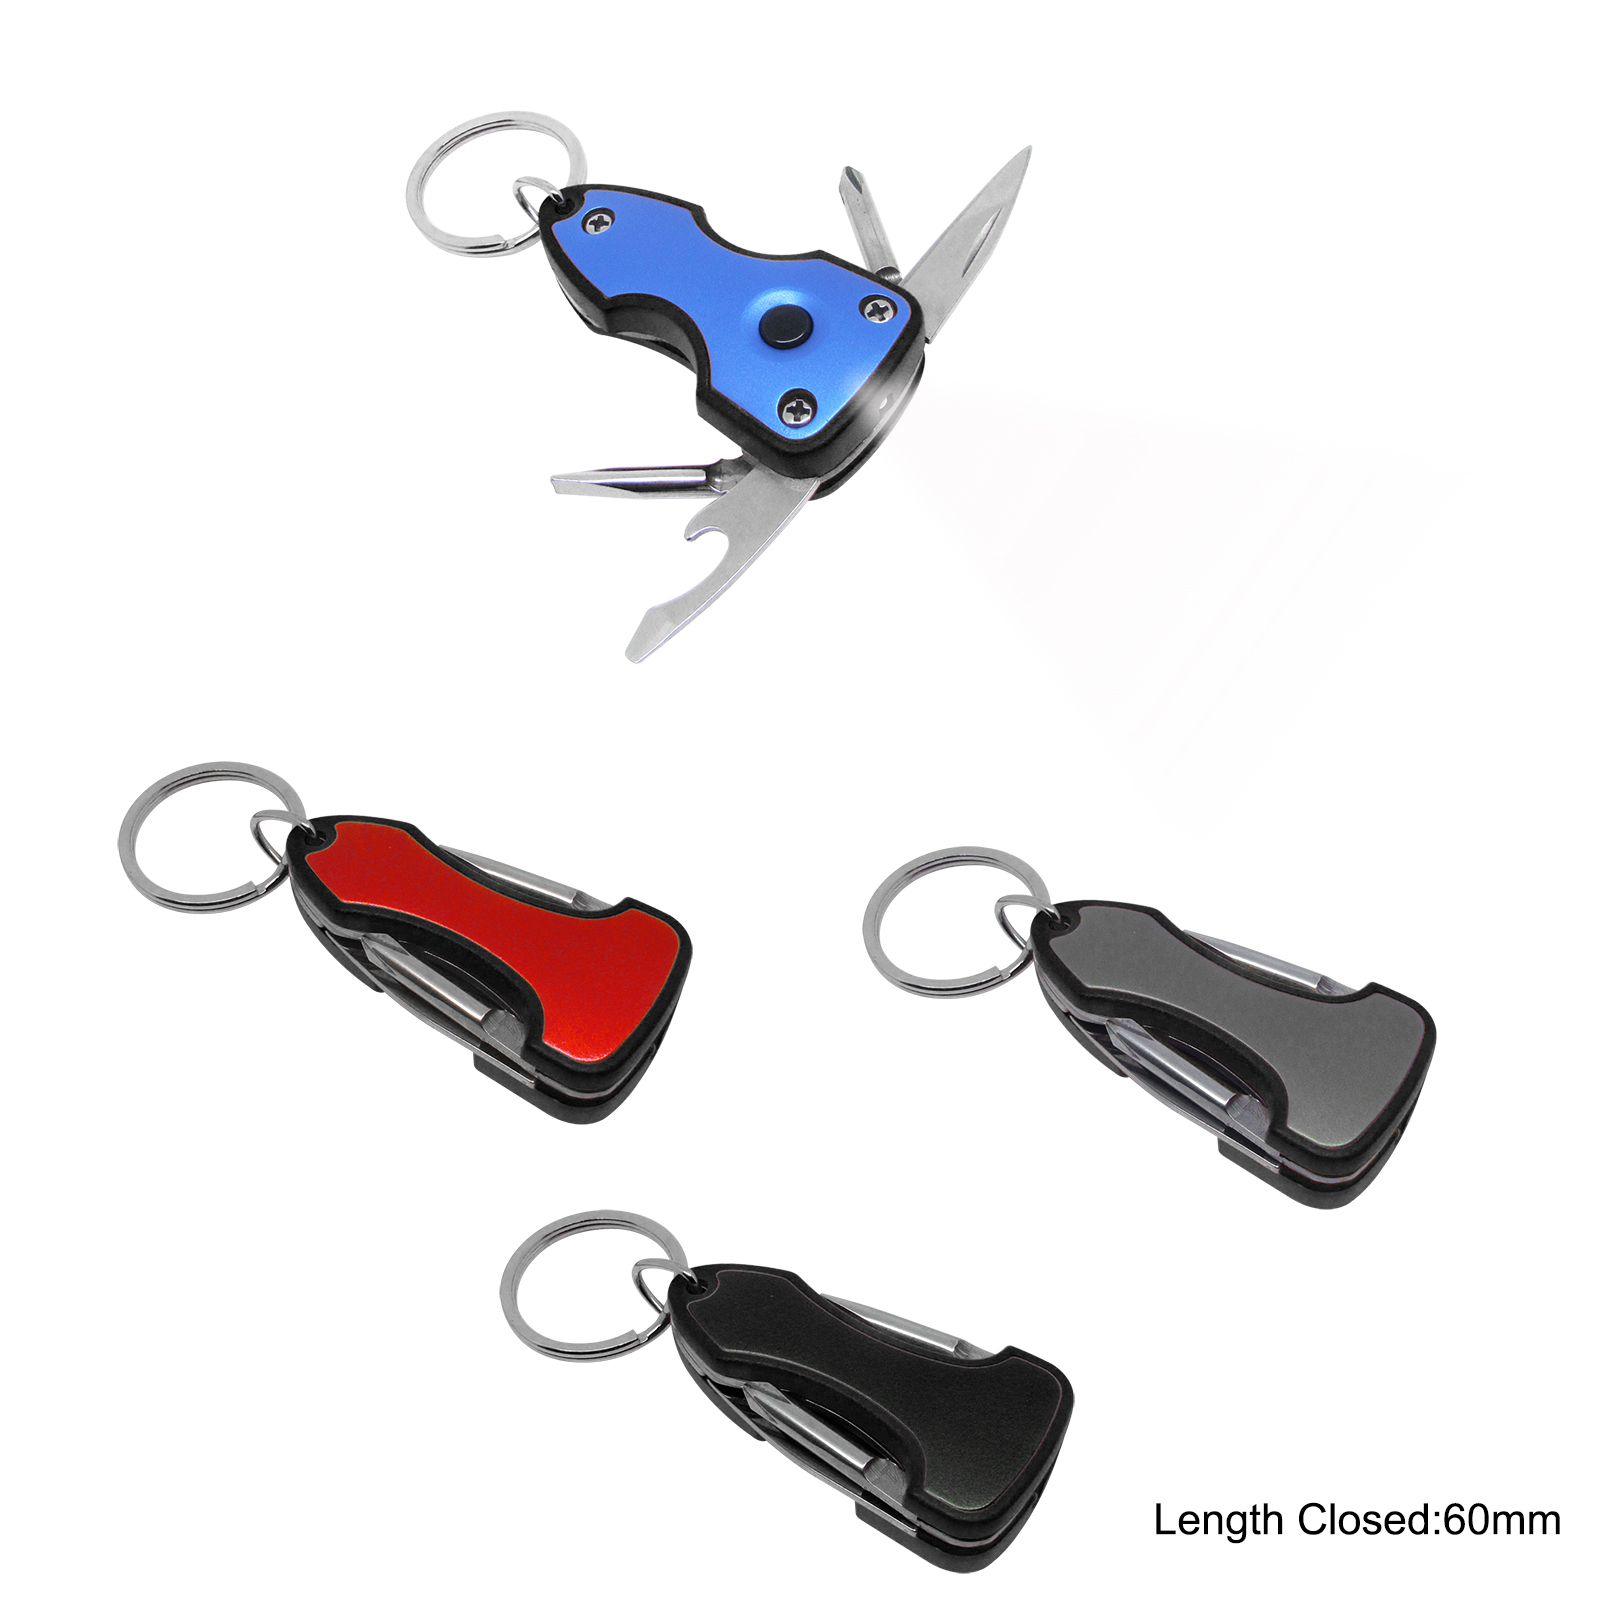 #668-BLK Multi Function Key Chain Tools with LED Torch 